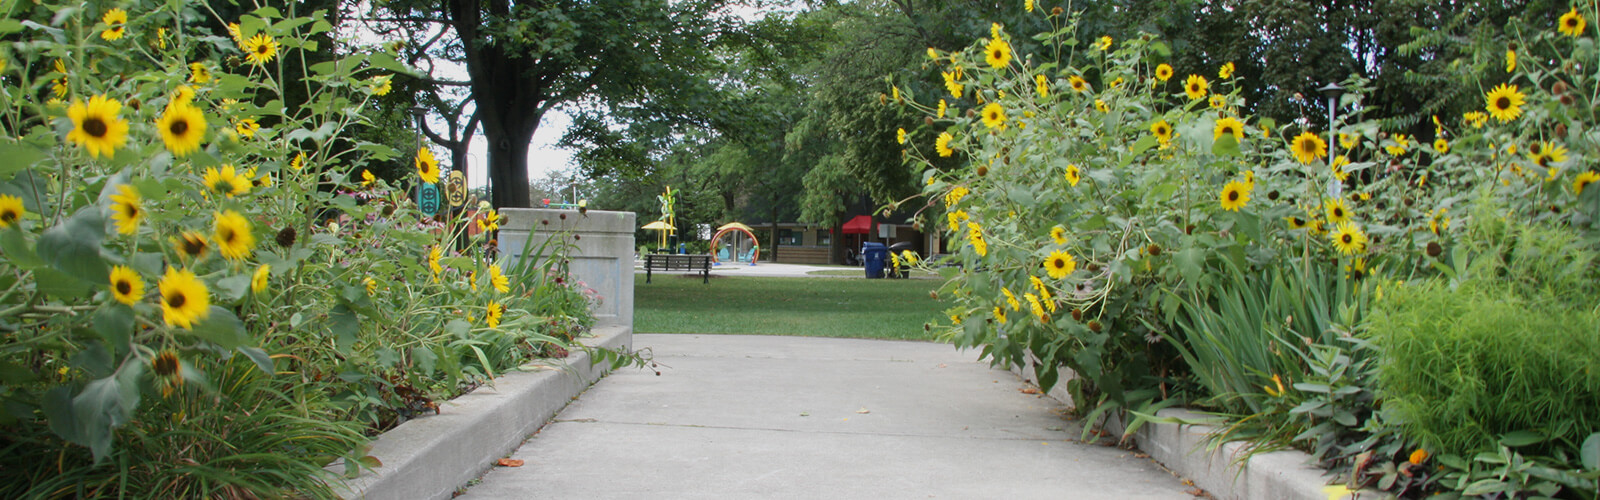 A paved path leads toward a maintained park lawn. On either side of the path, lush flower beds. Beyond the park lawn is a children's splashpad surrounded by lush trees and a park bench.